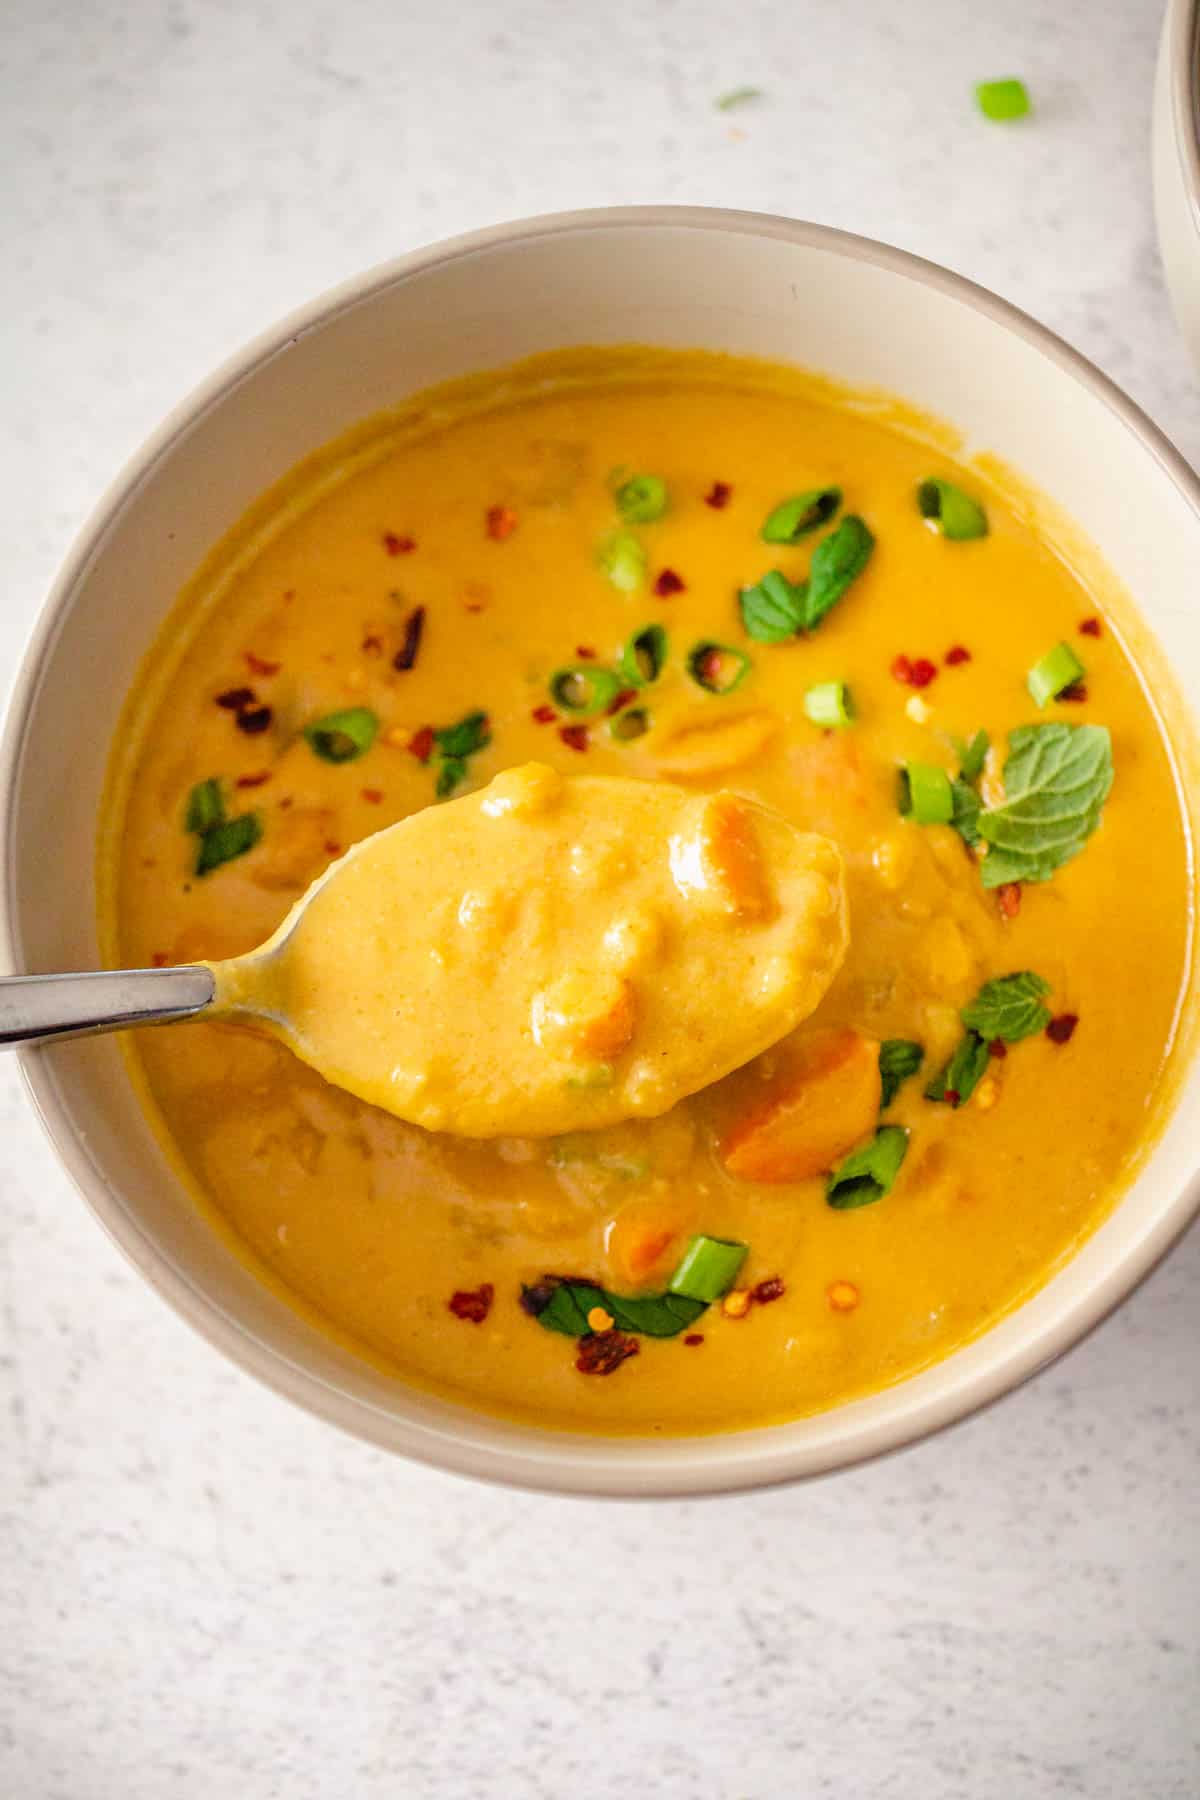 Spoonful of creamy carrot and lentil soup.